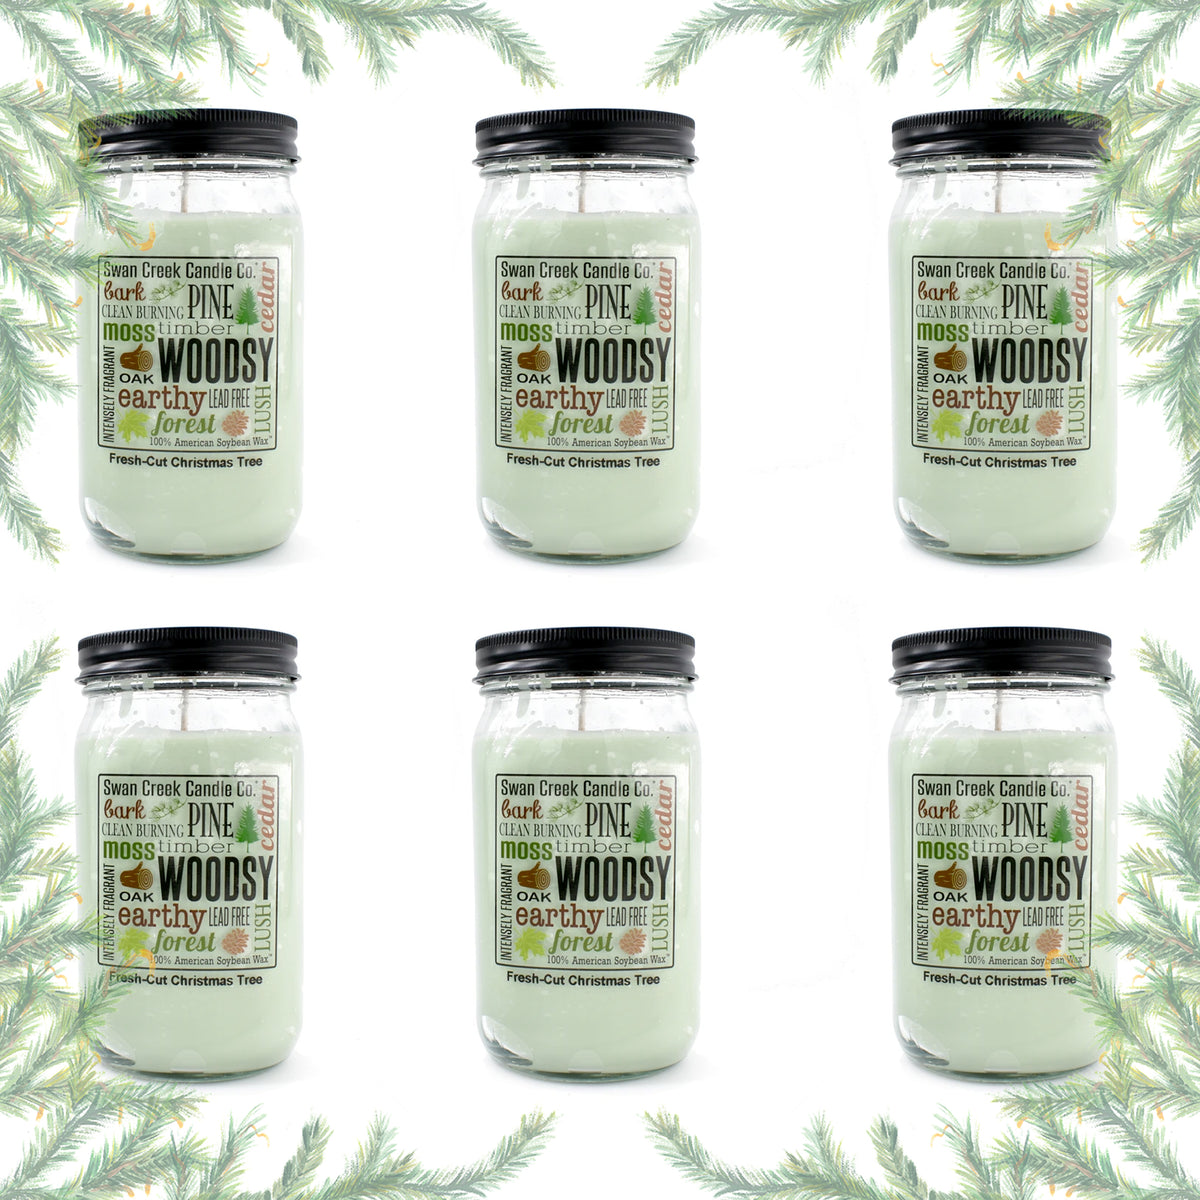 Fresh Cut Christmas Tree 24oz Soy Candle Pantry Jar (6 Pack) by Swan Creek Candle